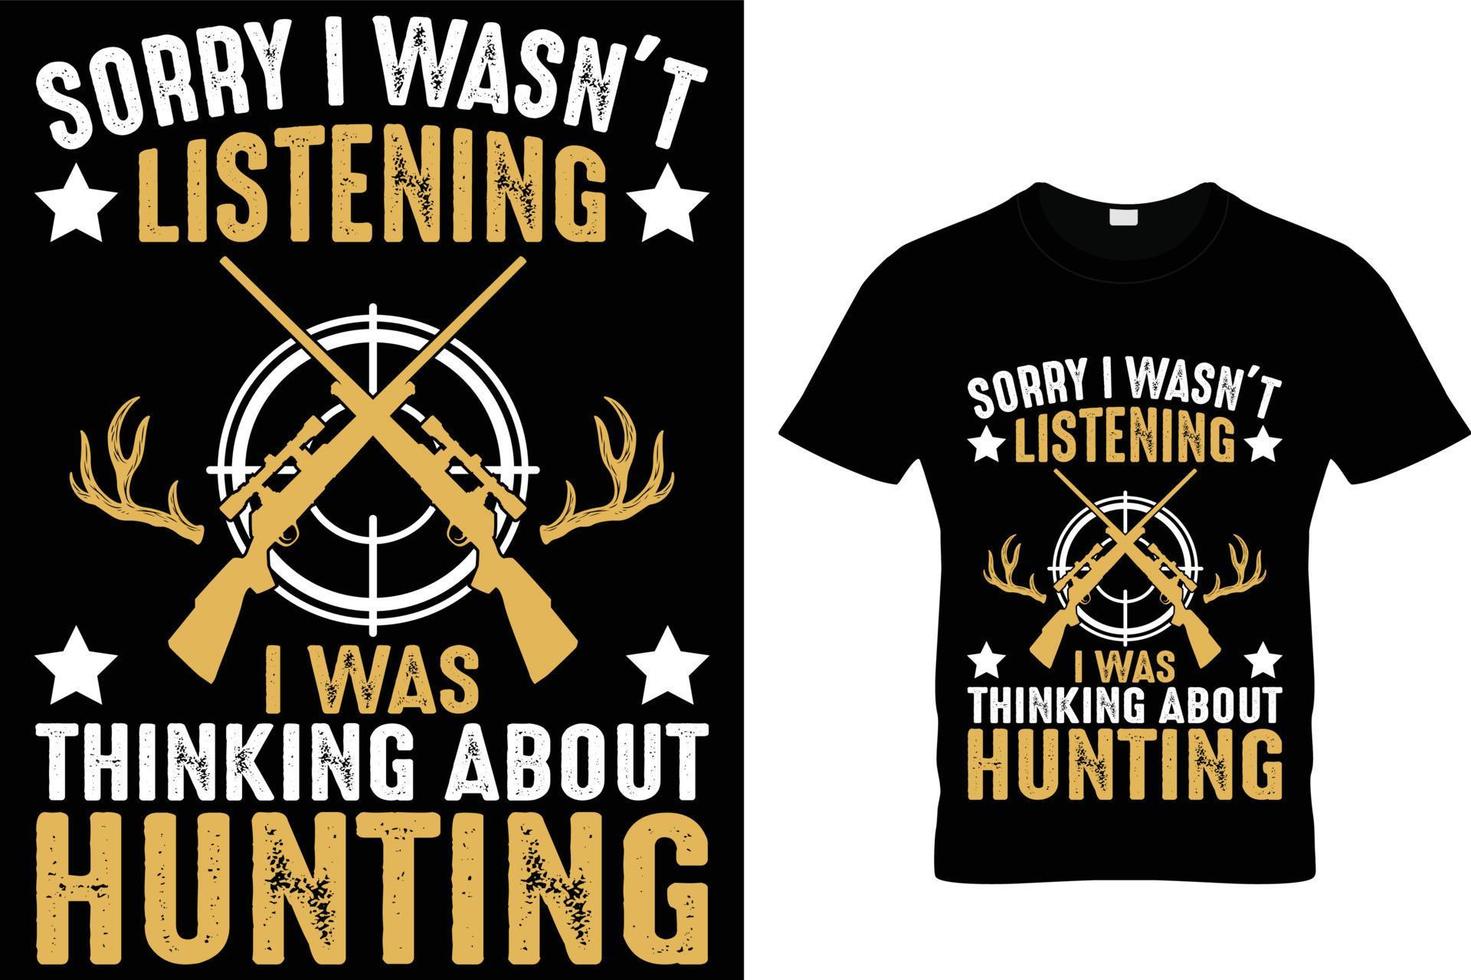 sorry i wasn't listening i was thinking about hunting t shirt design.  hunting t shirt design, hunting t shirt print vector, Hunting t shirt quotes vector design illustration, Vector graphic.